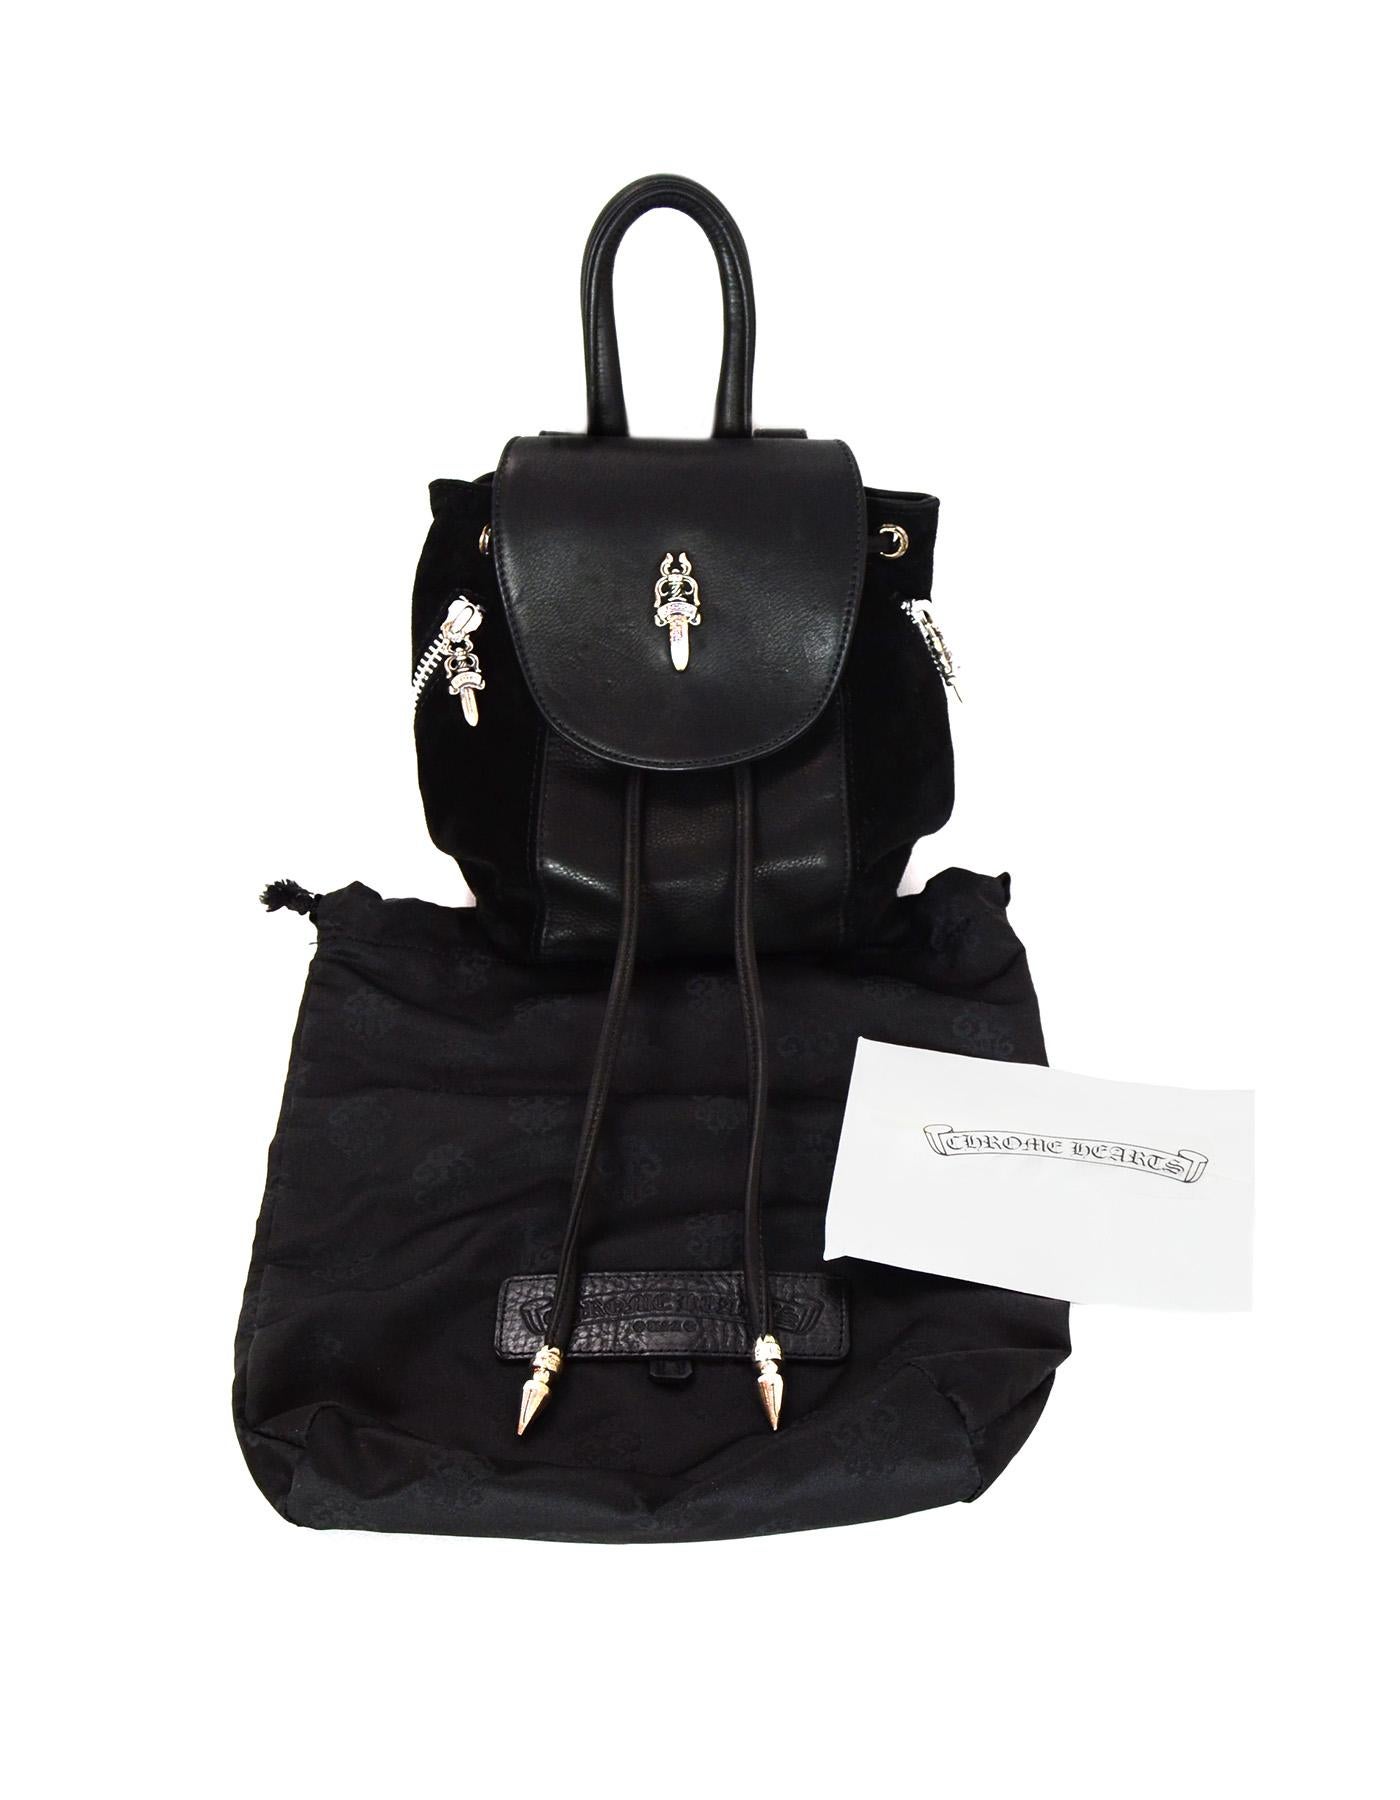 Chrome Hearts Black Suede and Leather Silver Hardware Mini Iggy Backpack Bag  4